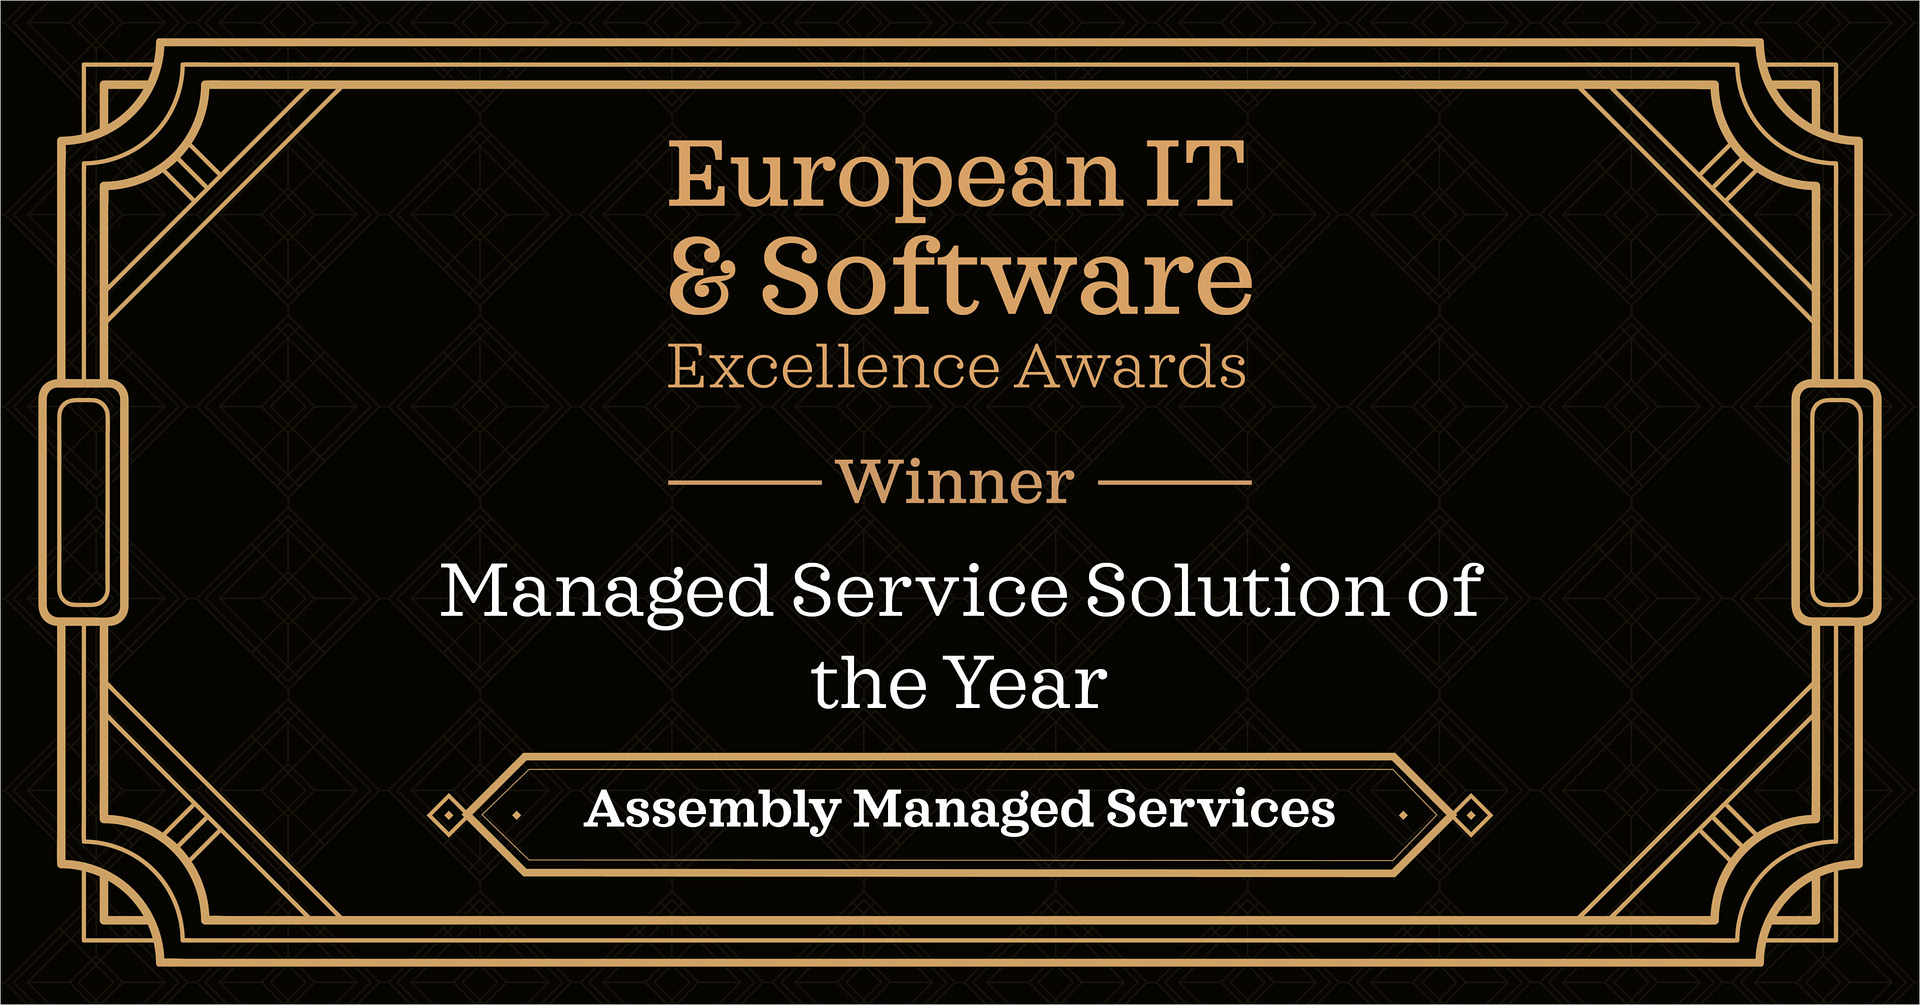 Managed service solution of the year.